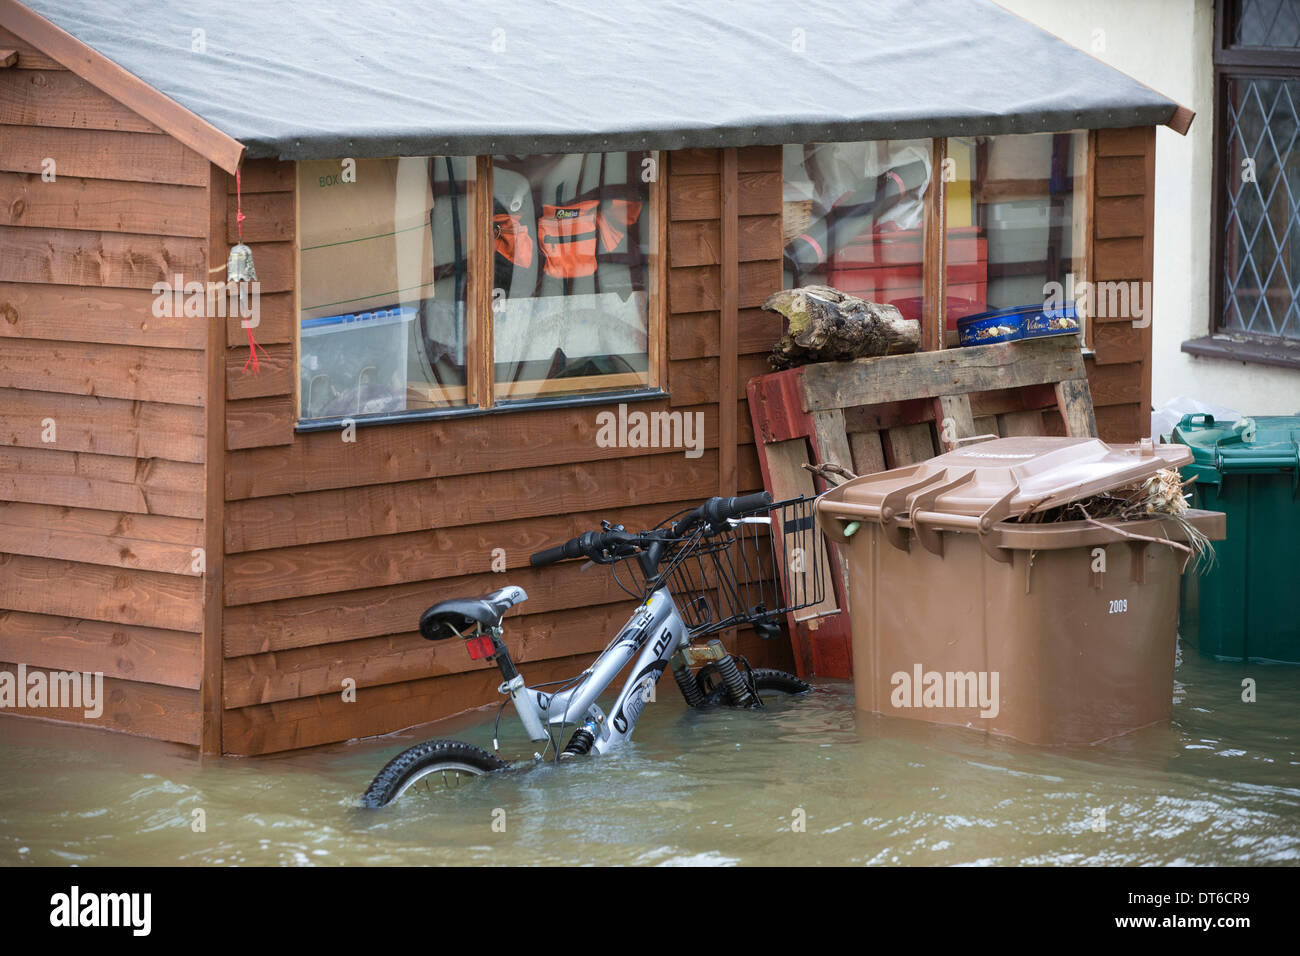 Shepperton, Greater London, UK. 9th Feb, 2014.  A garden shed and outside belongings are emersed in water  the flooded streets in the town of Shepperton, located in the borough of Spelthorne, Greater London. Credit:  Jeff Gilbert/Alamy Live News Stock Photo